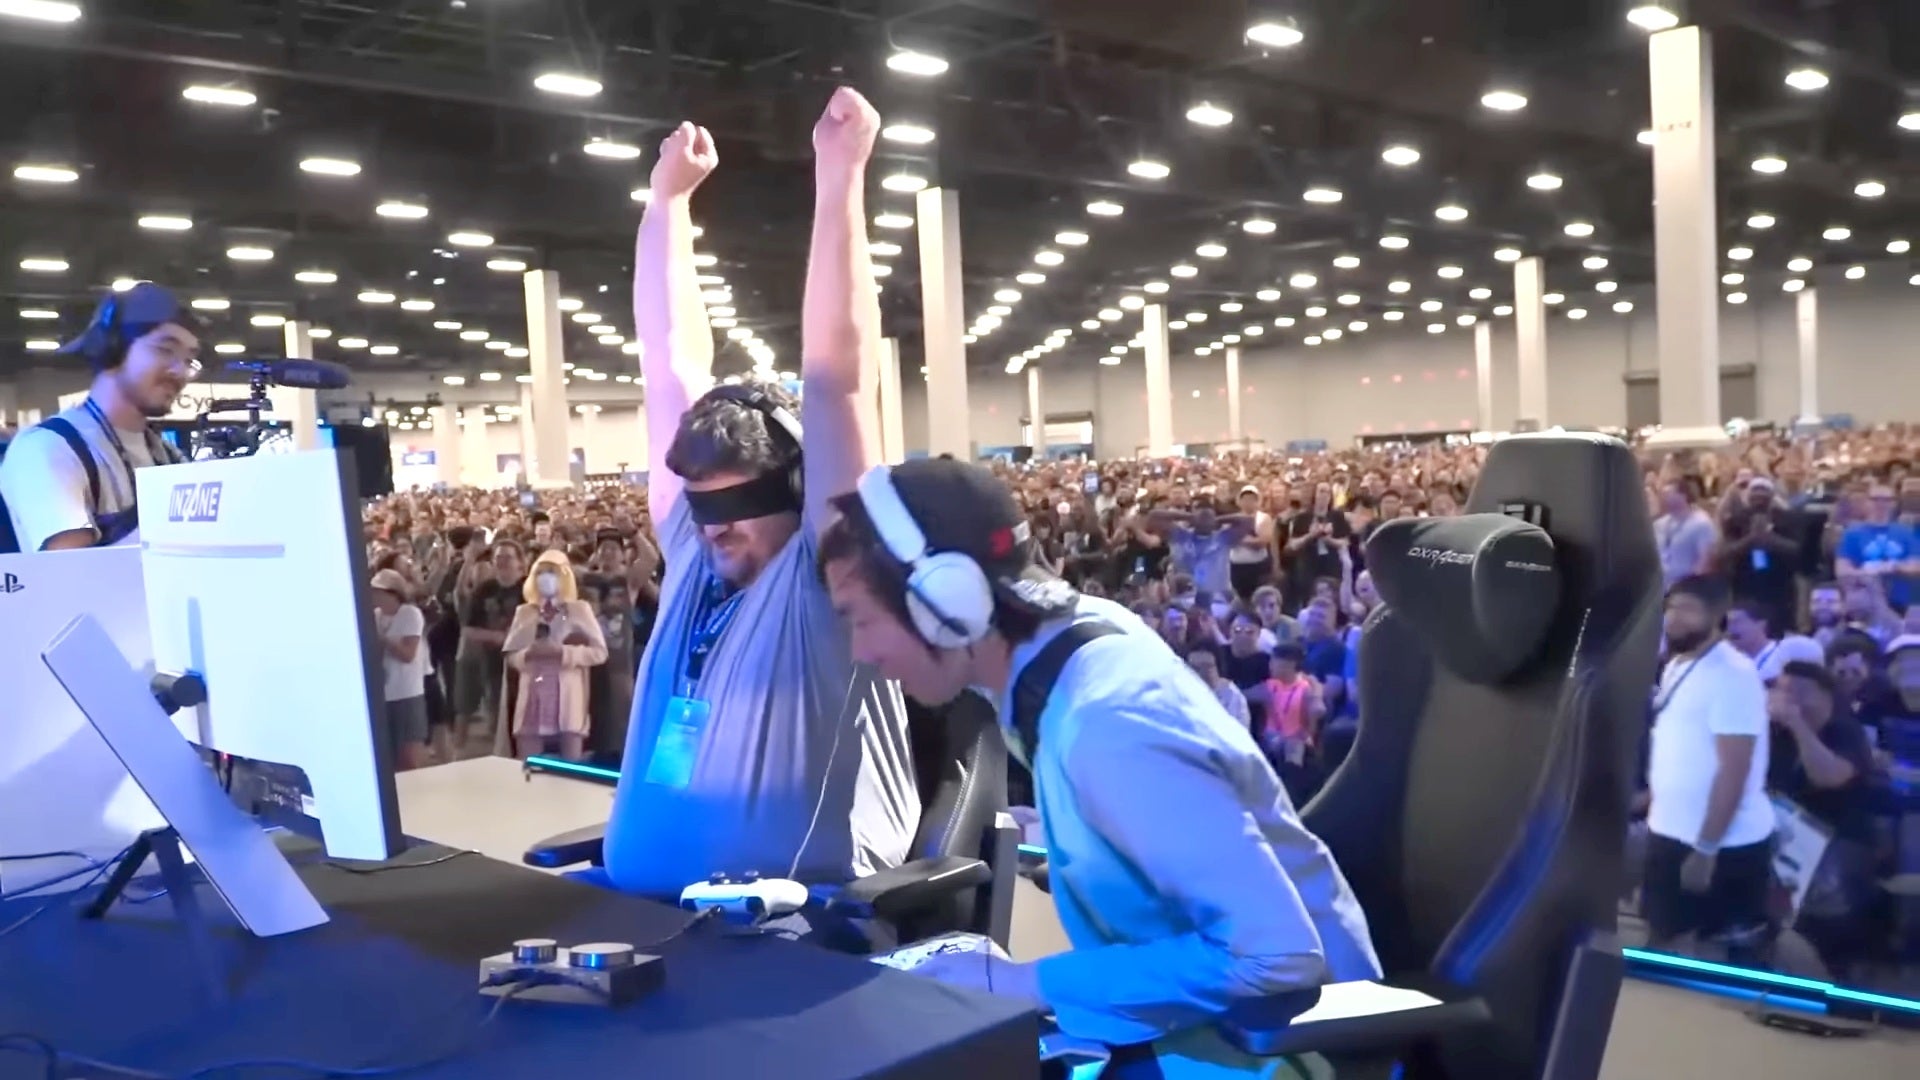 PS5s Got So Hot At Fighting Game Tournament, Things 'Melted